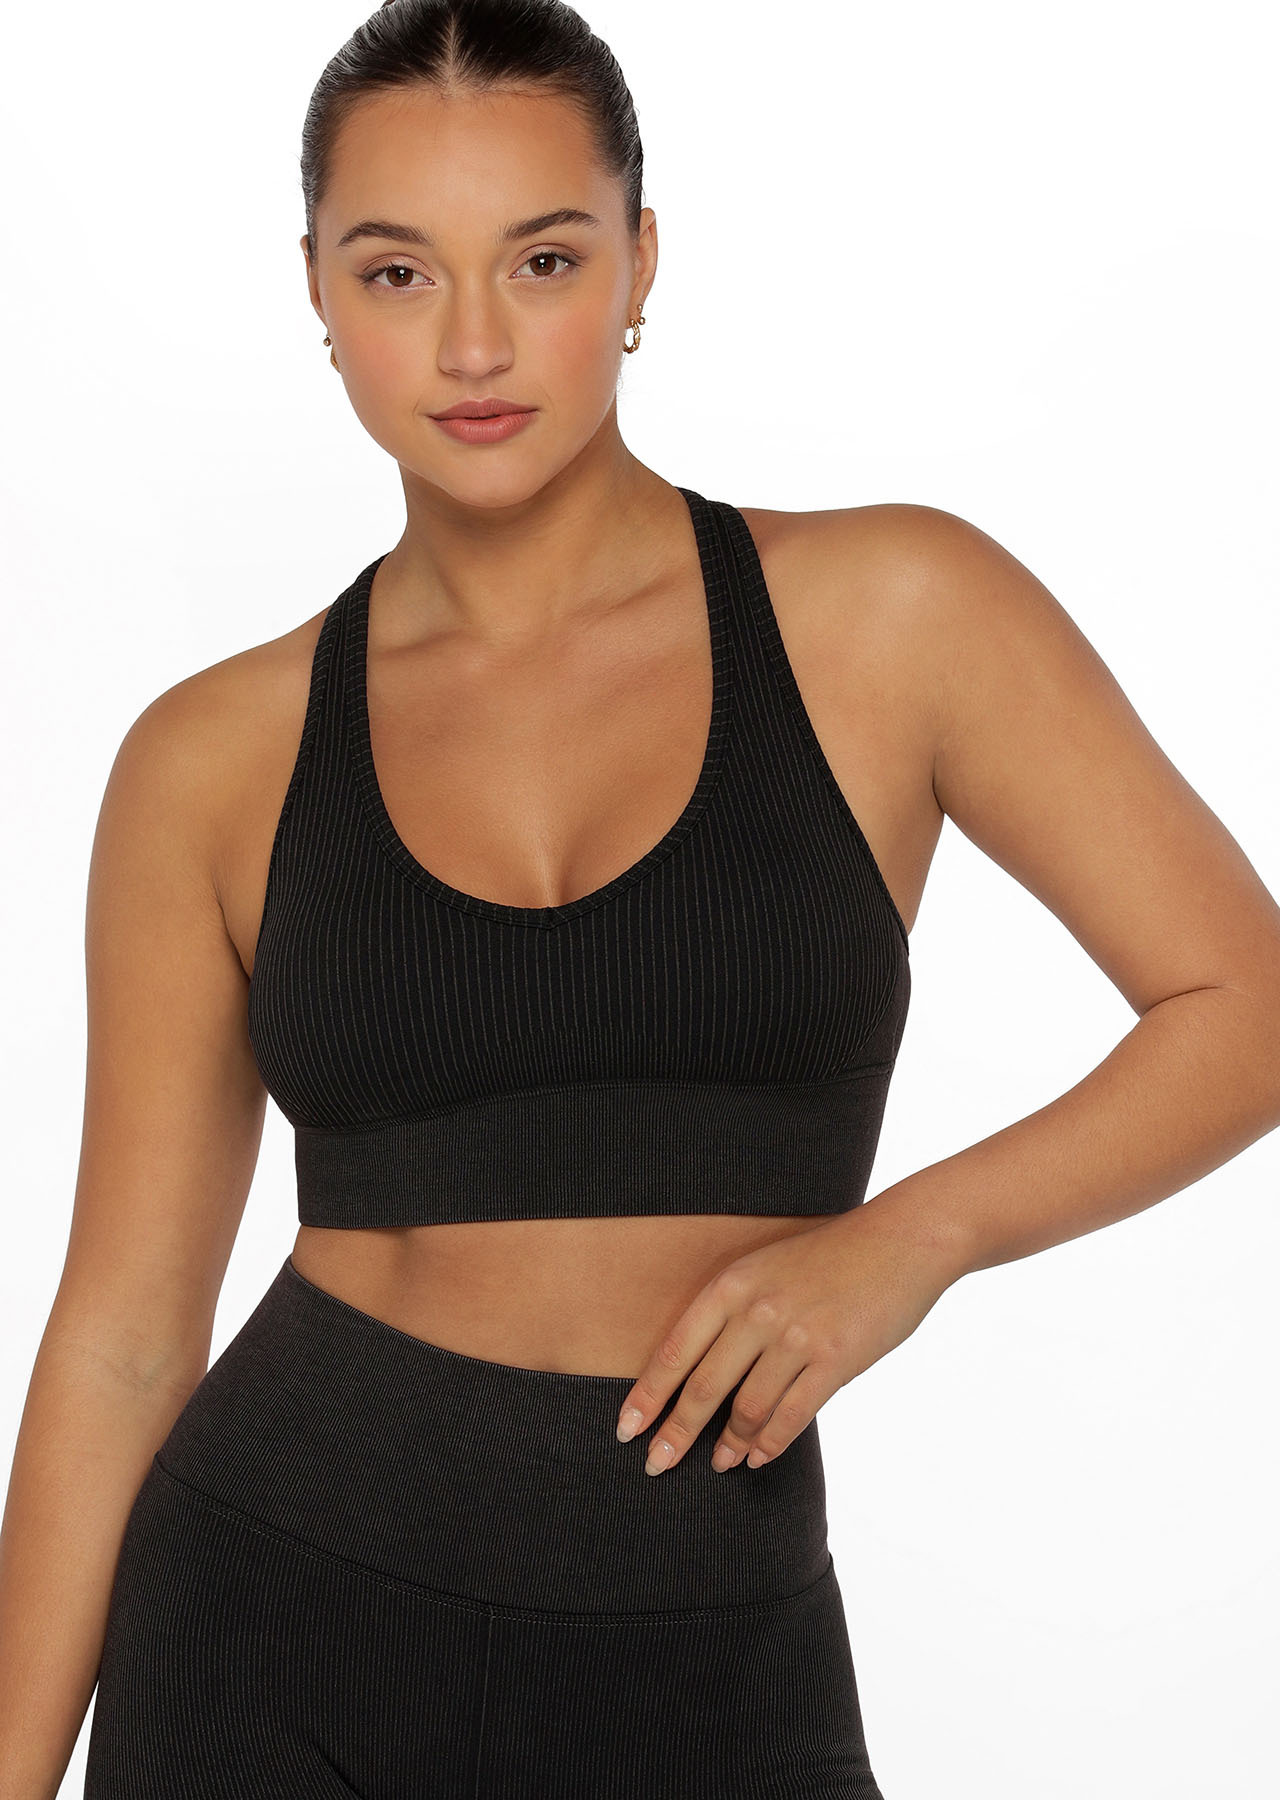 LL Womens Seamless Cross Straps Push Up Fitness Lorna Jane Sports Bra For  Yoga, Running, And Gym From Victor_wong, $13.39